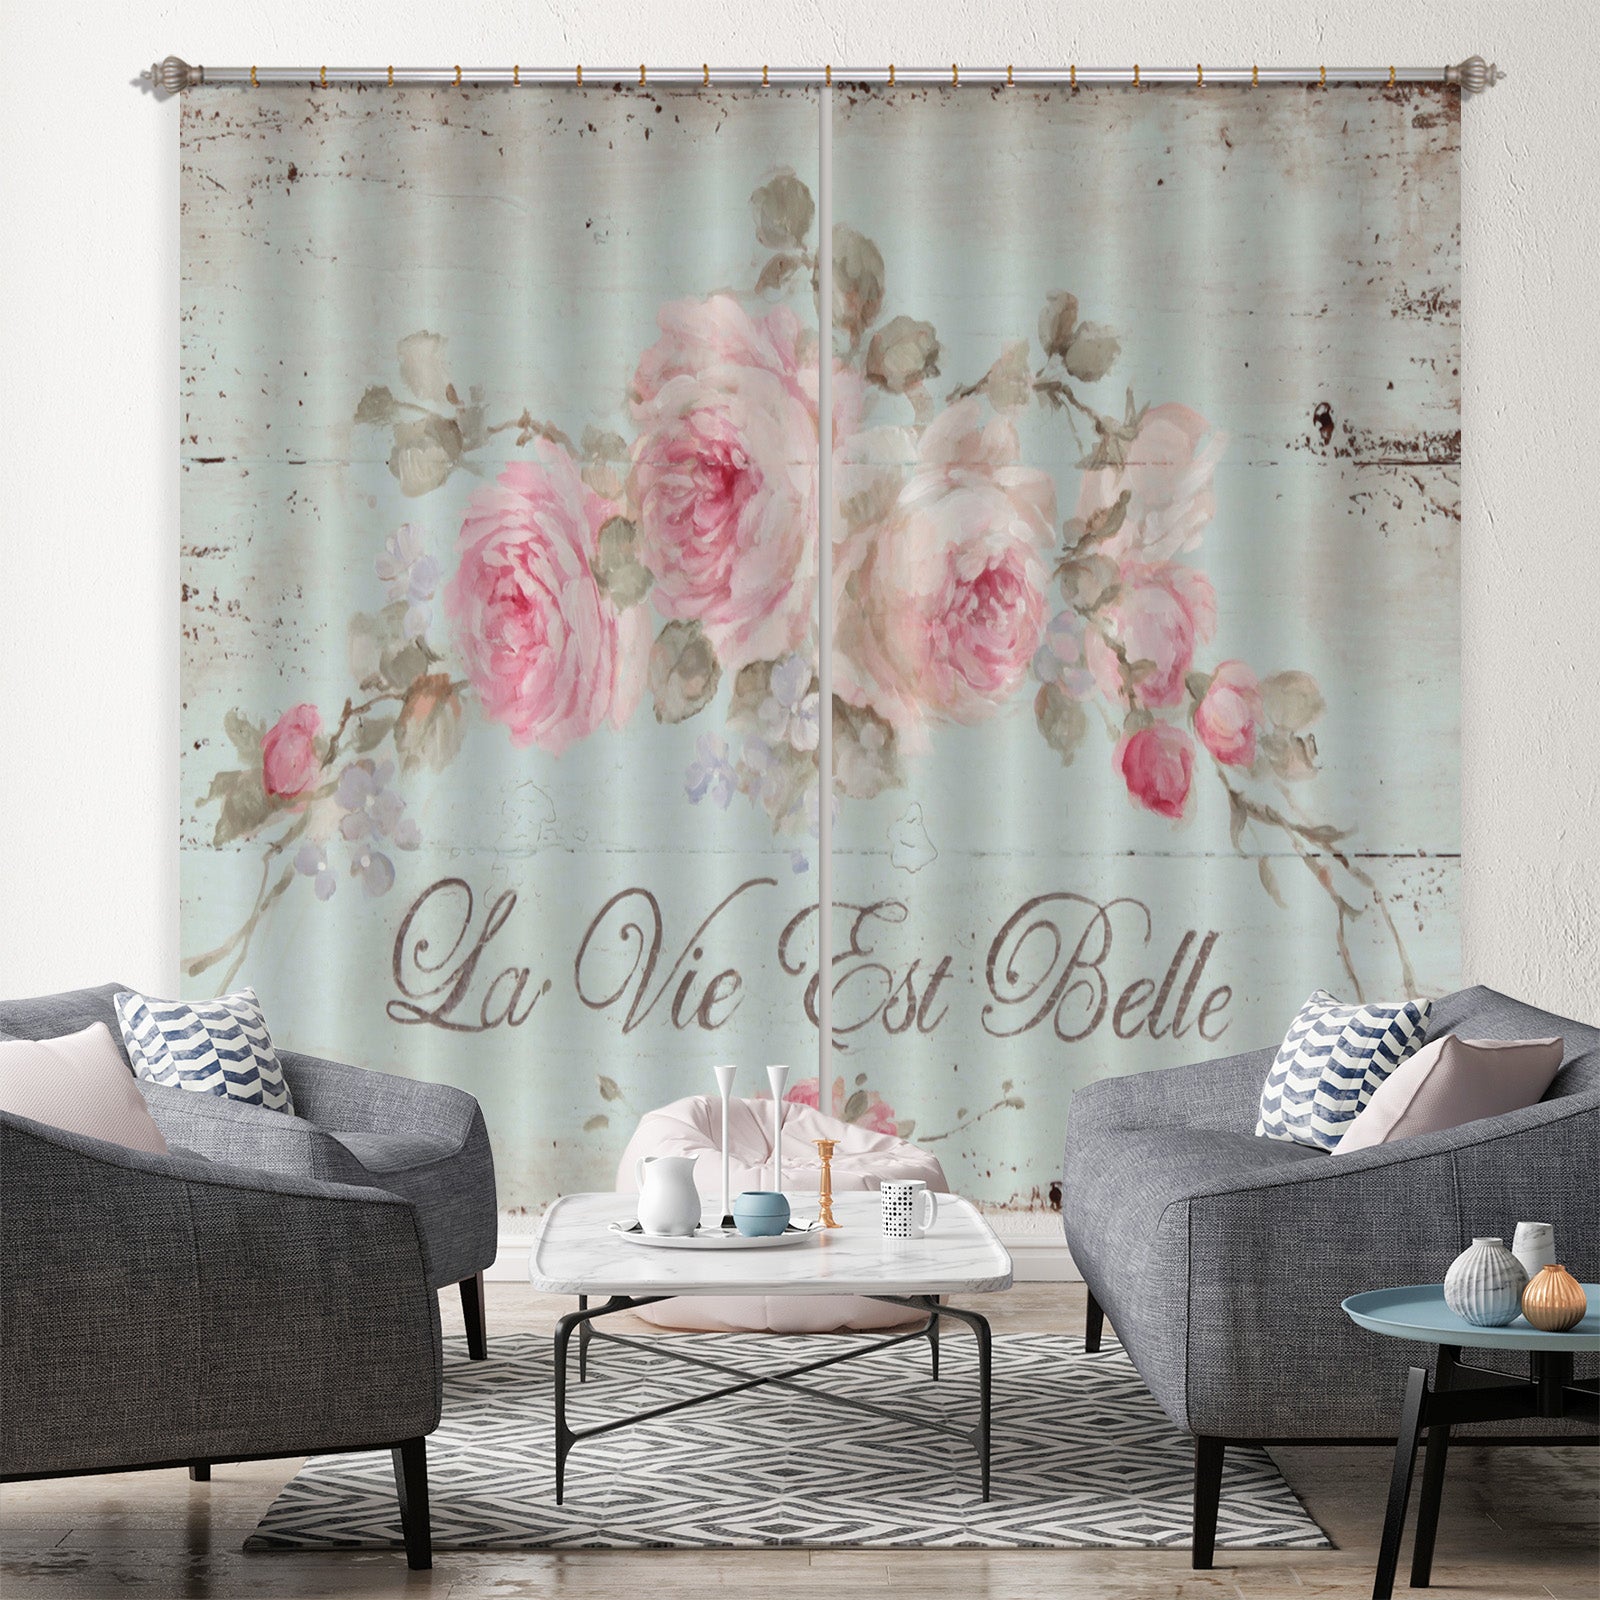 3D Pink Rose 053 Debi Coules Curtain Curtains Drapes